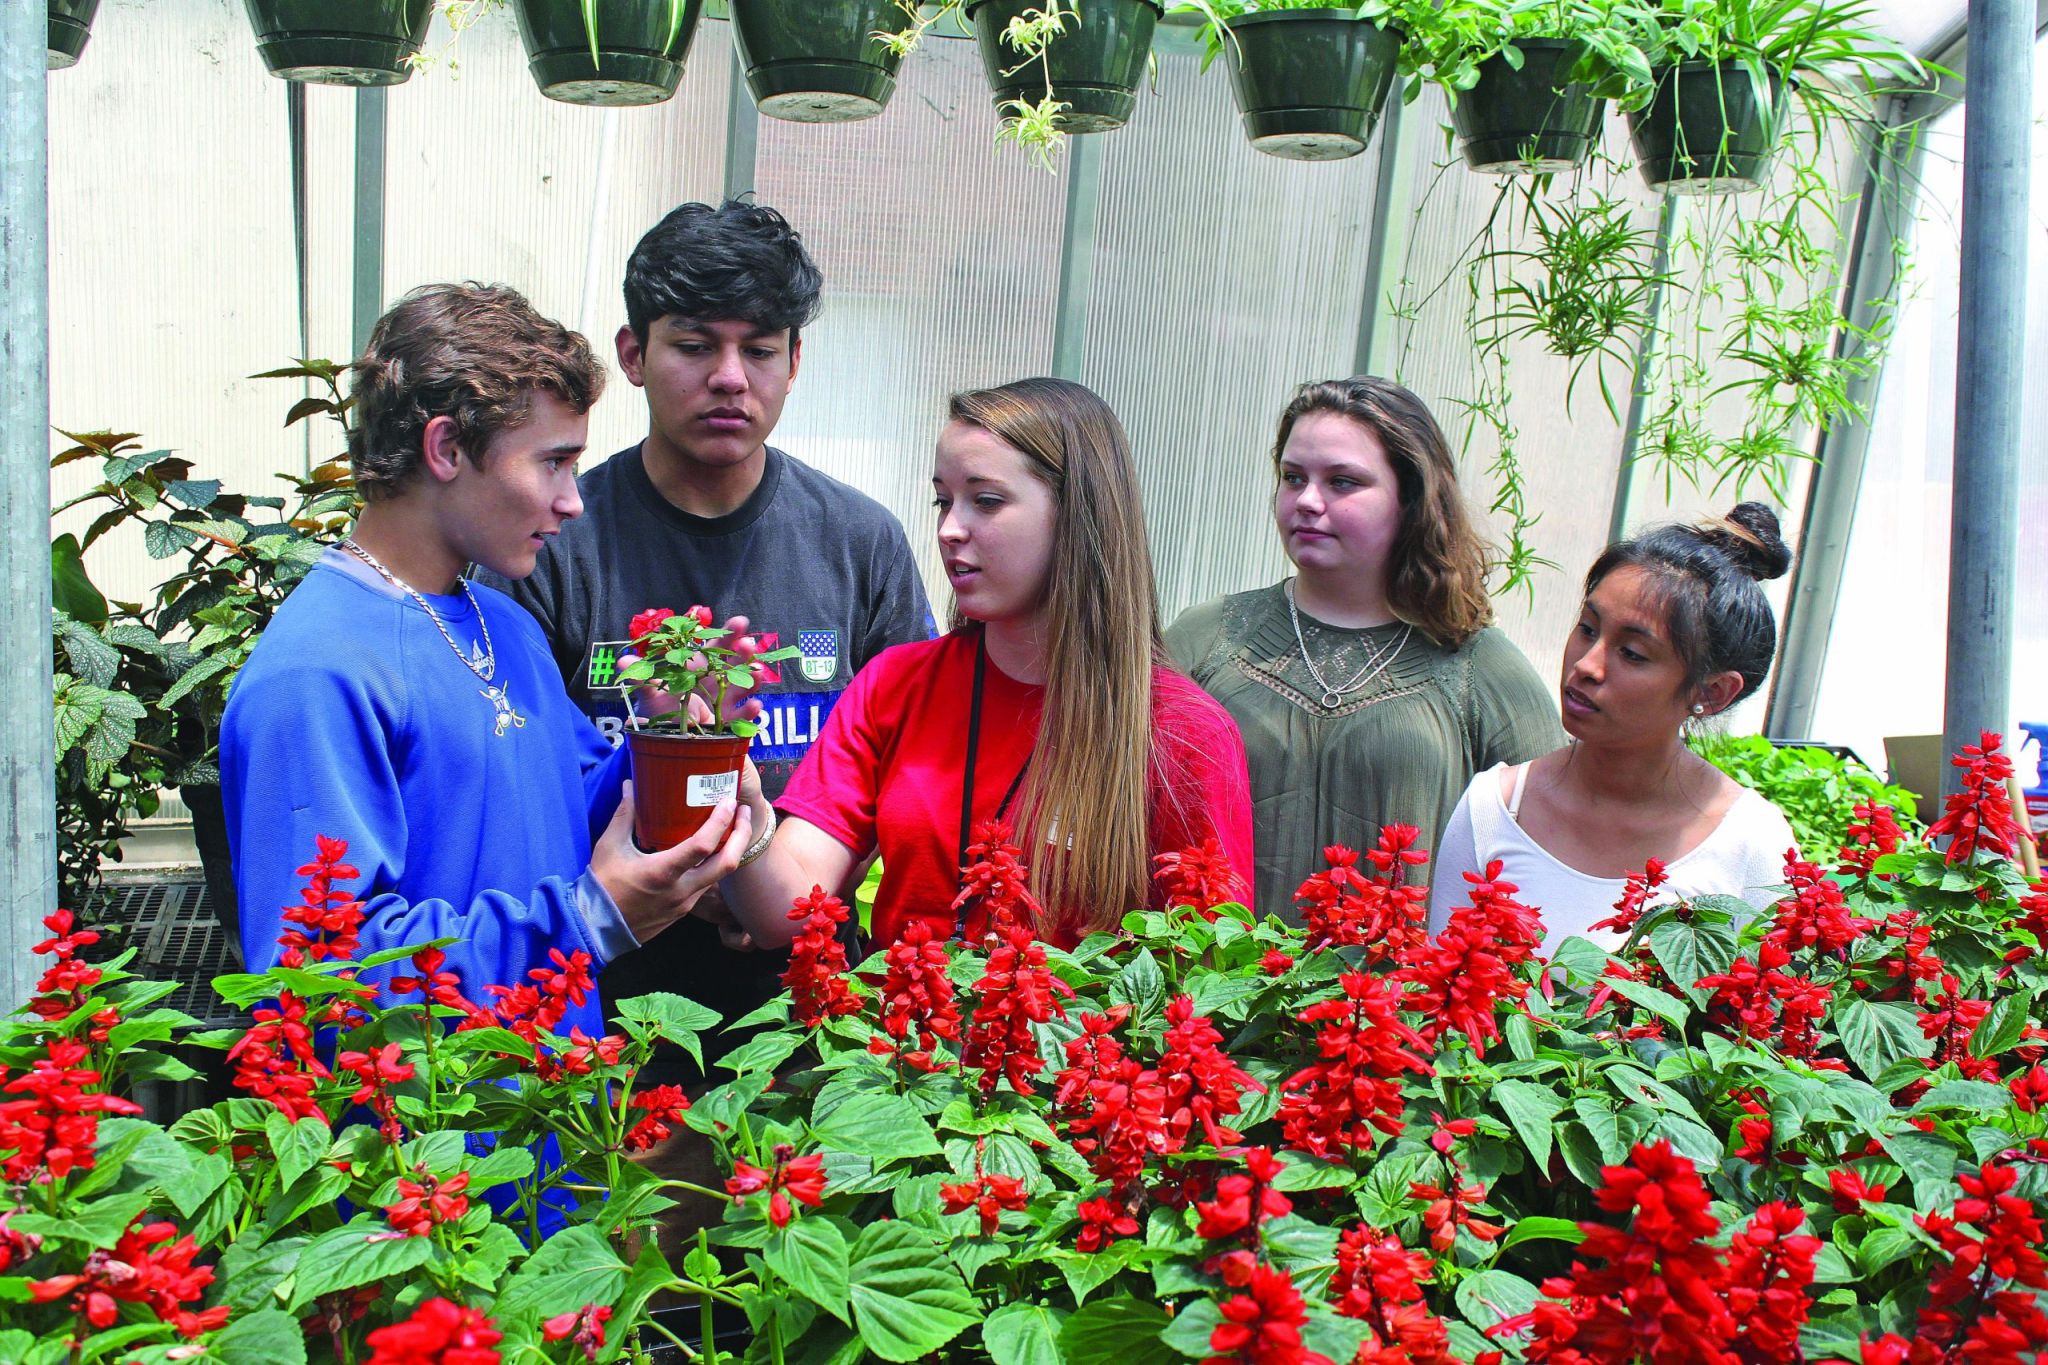 Students in a greenhouse studying flowers